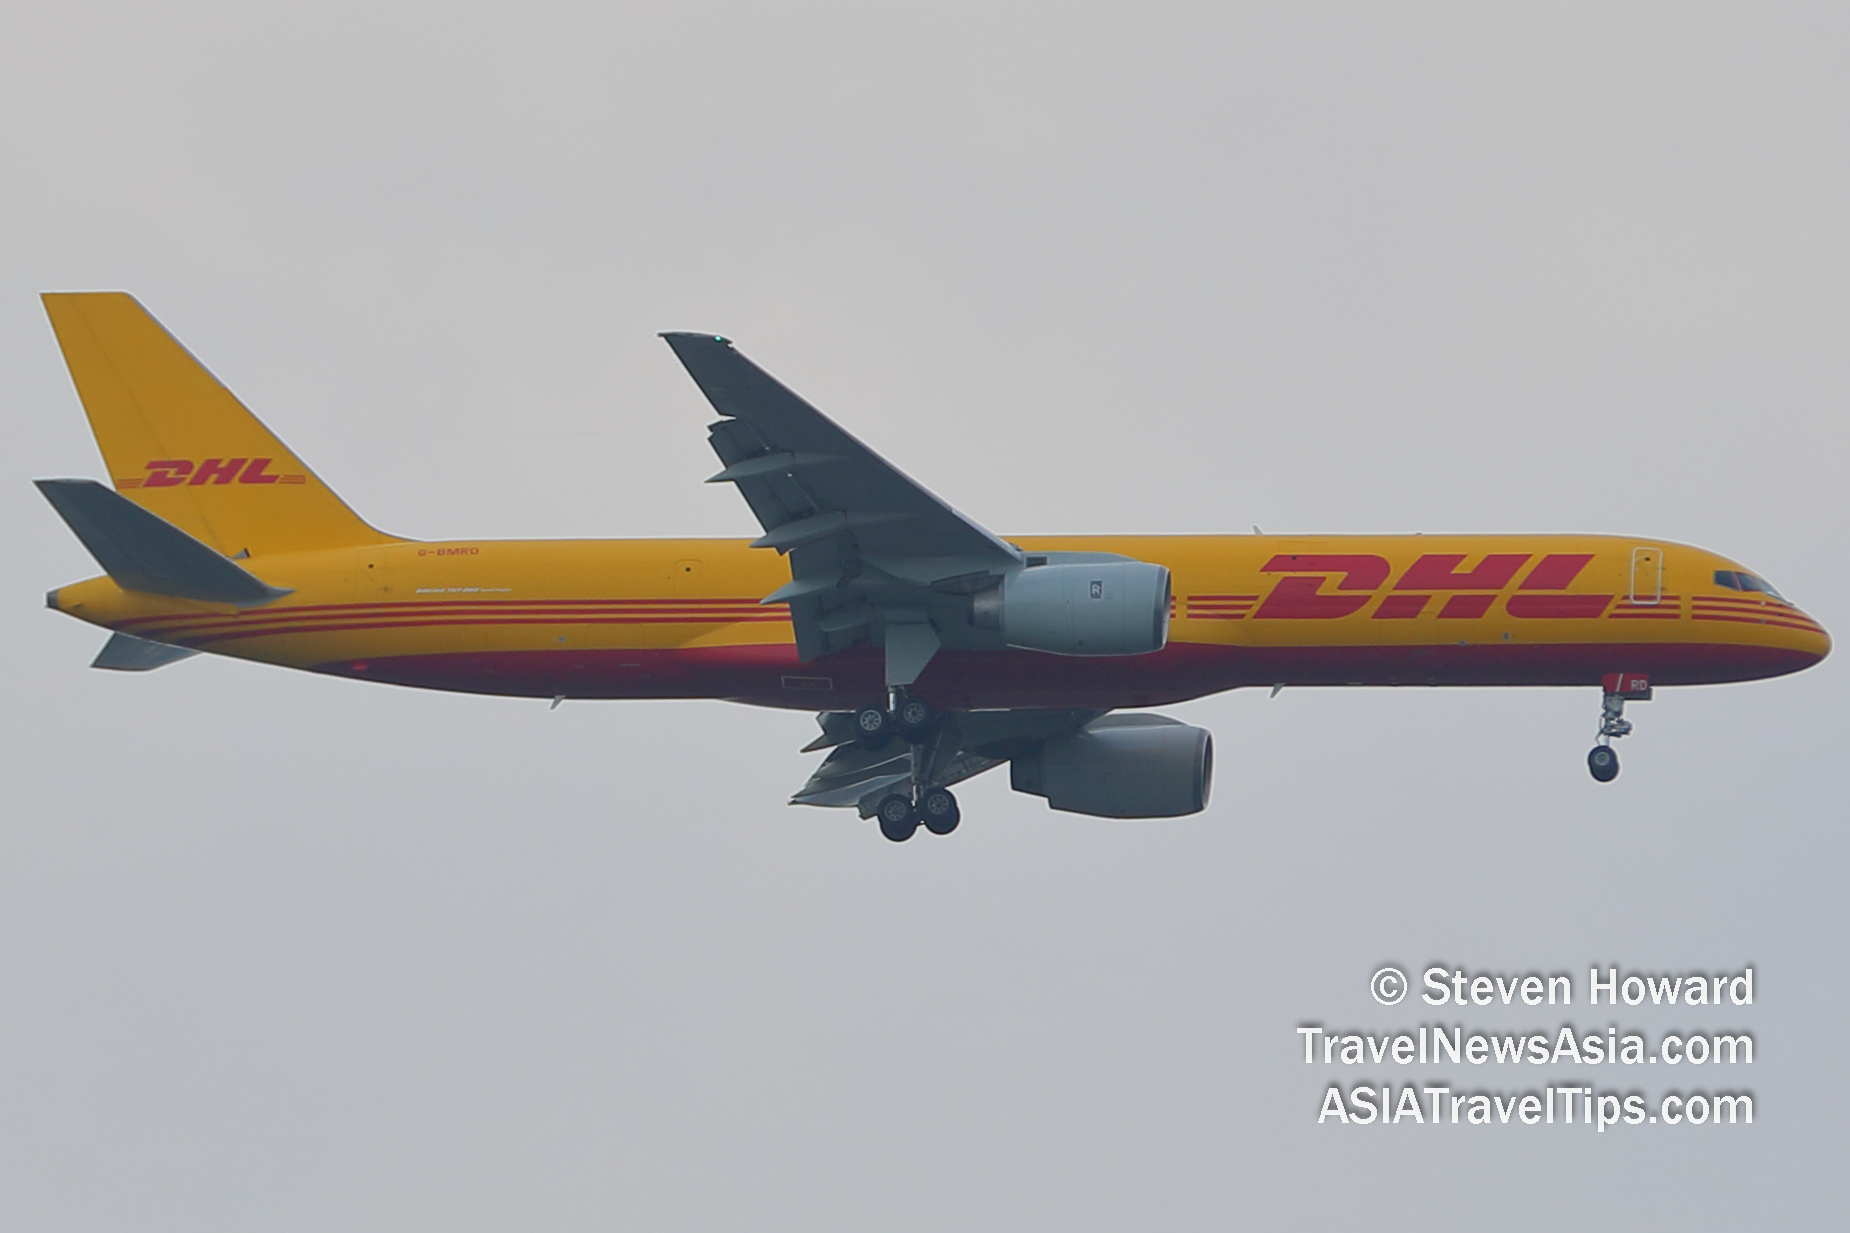 DHL Boeing 757 reg: GBMRD. Picture by Steven Howard of TravelNewsAsia.com Click to enlarge.